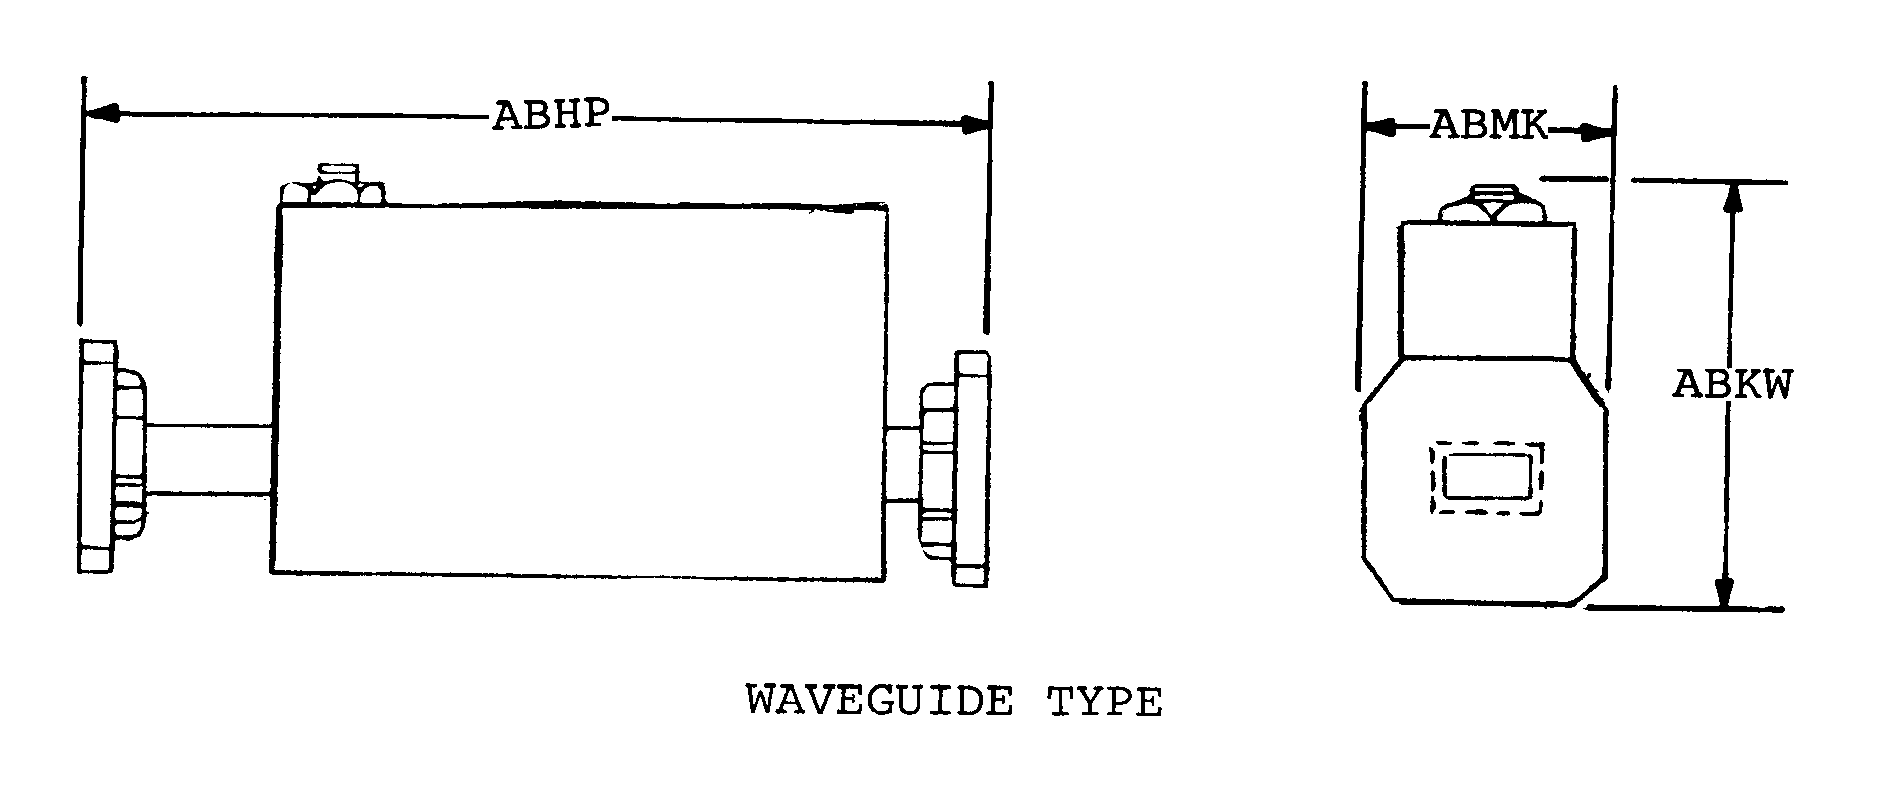 WAVEGUIDE TYPE style nsn 5985-01-443-4508